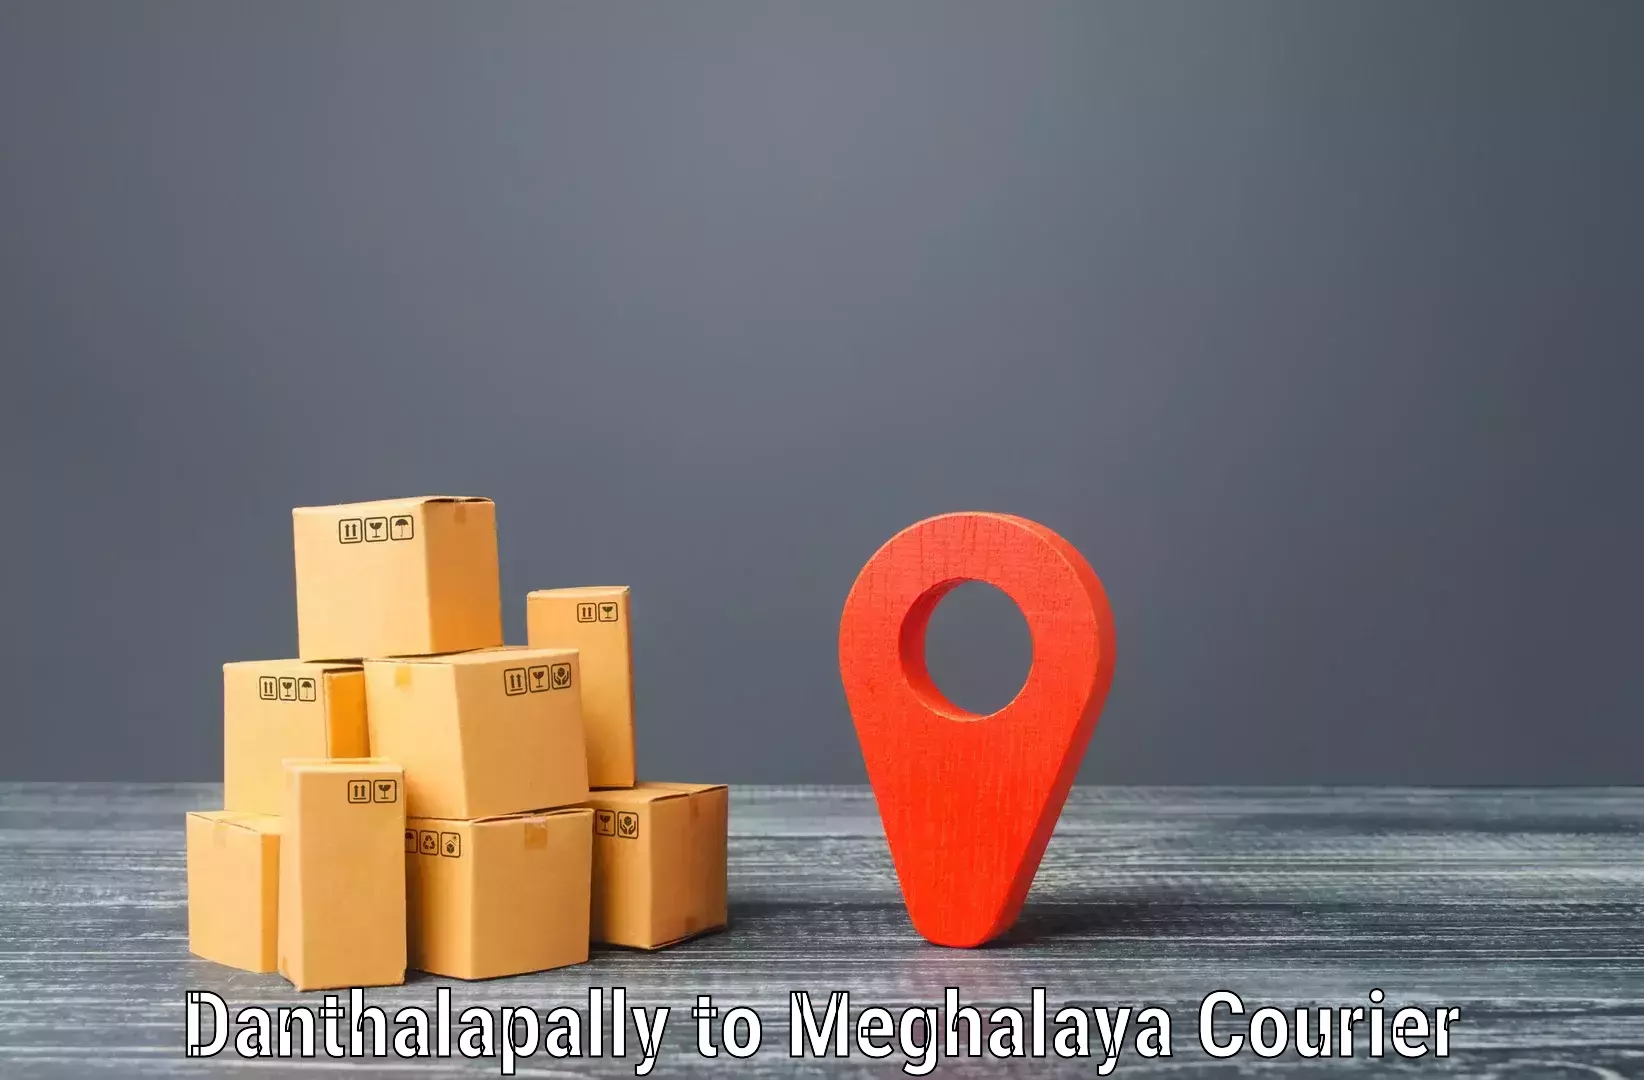 Local delivery service Danthalapally to Phulbari